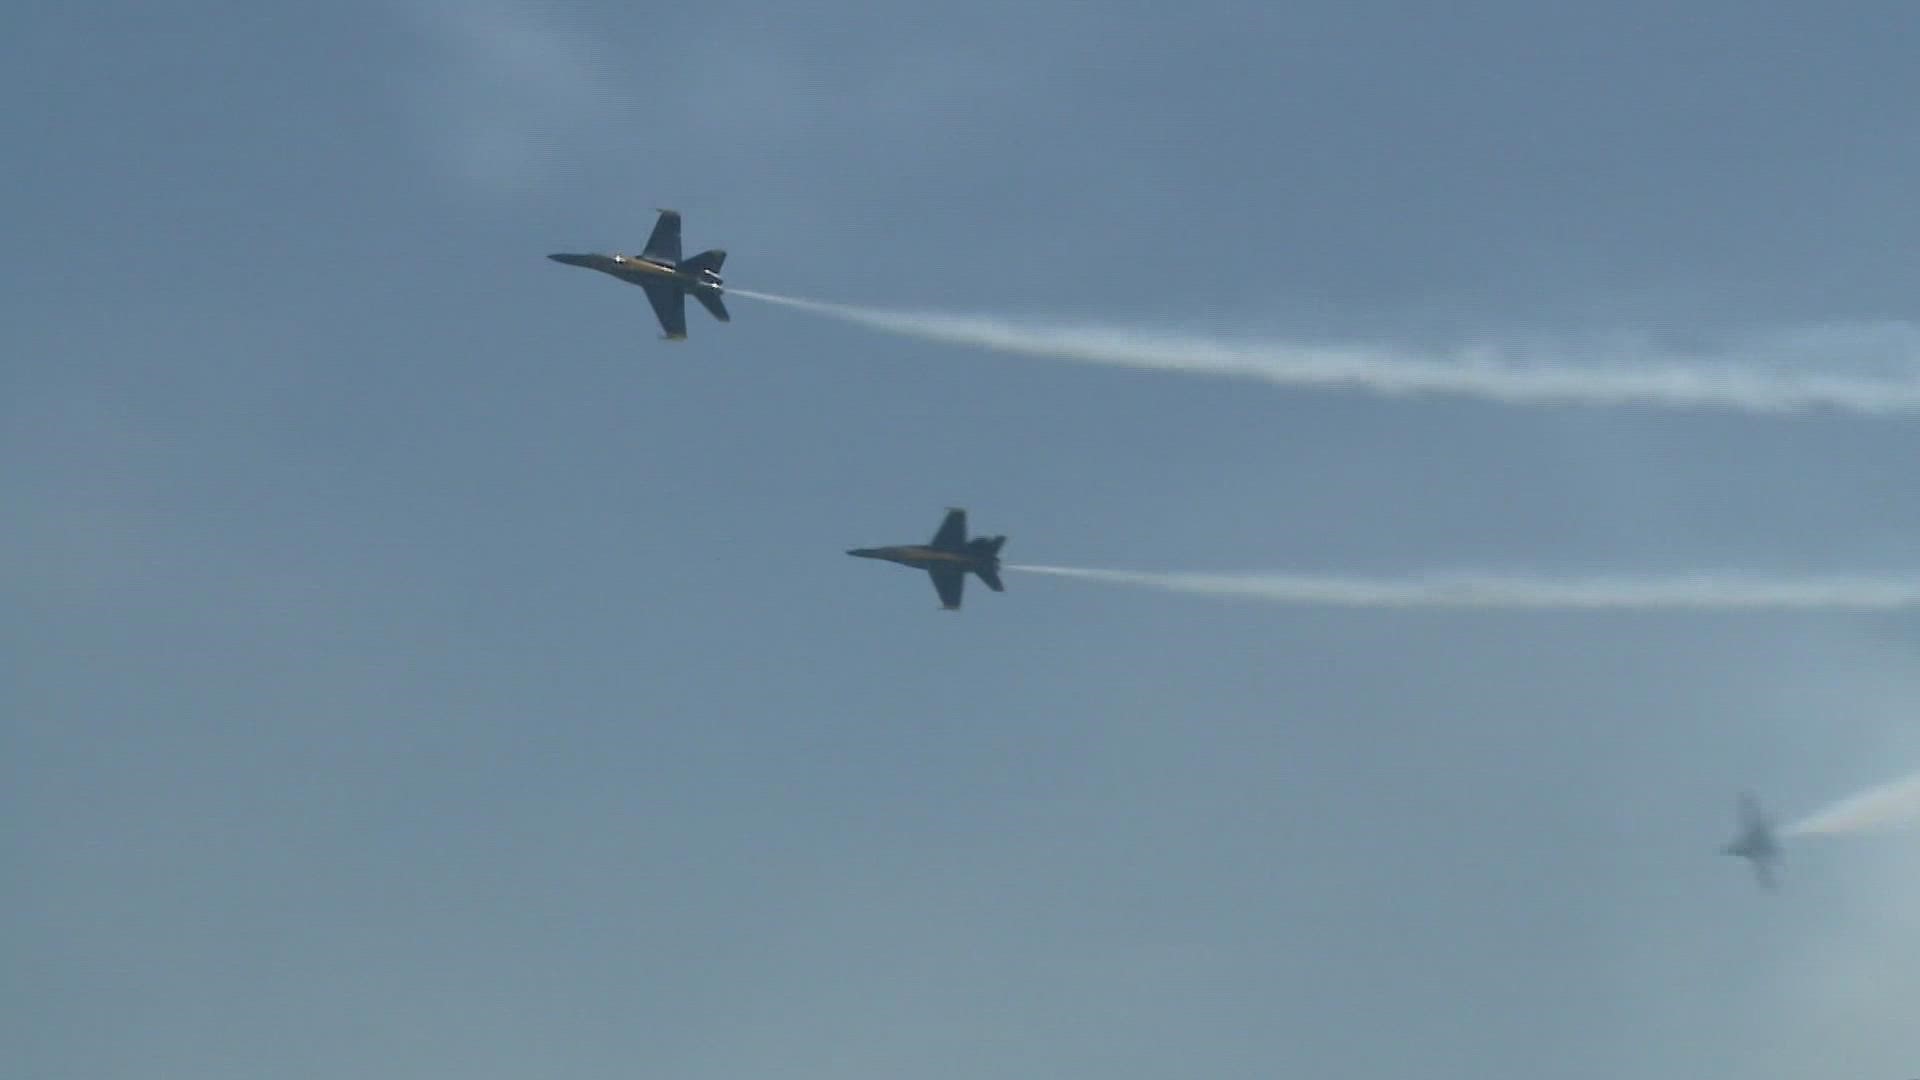 The air show gives people in East Tennessee a chance to see military airpower in action.